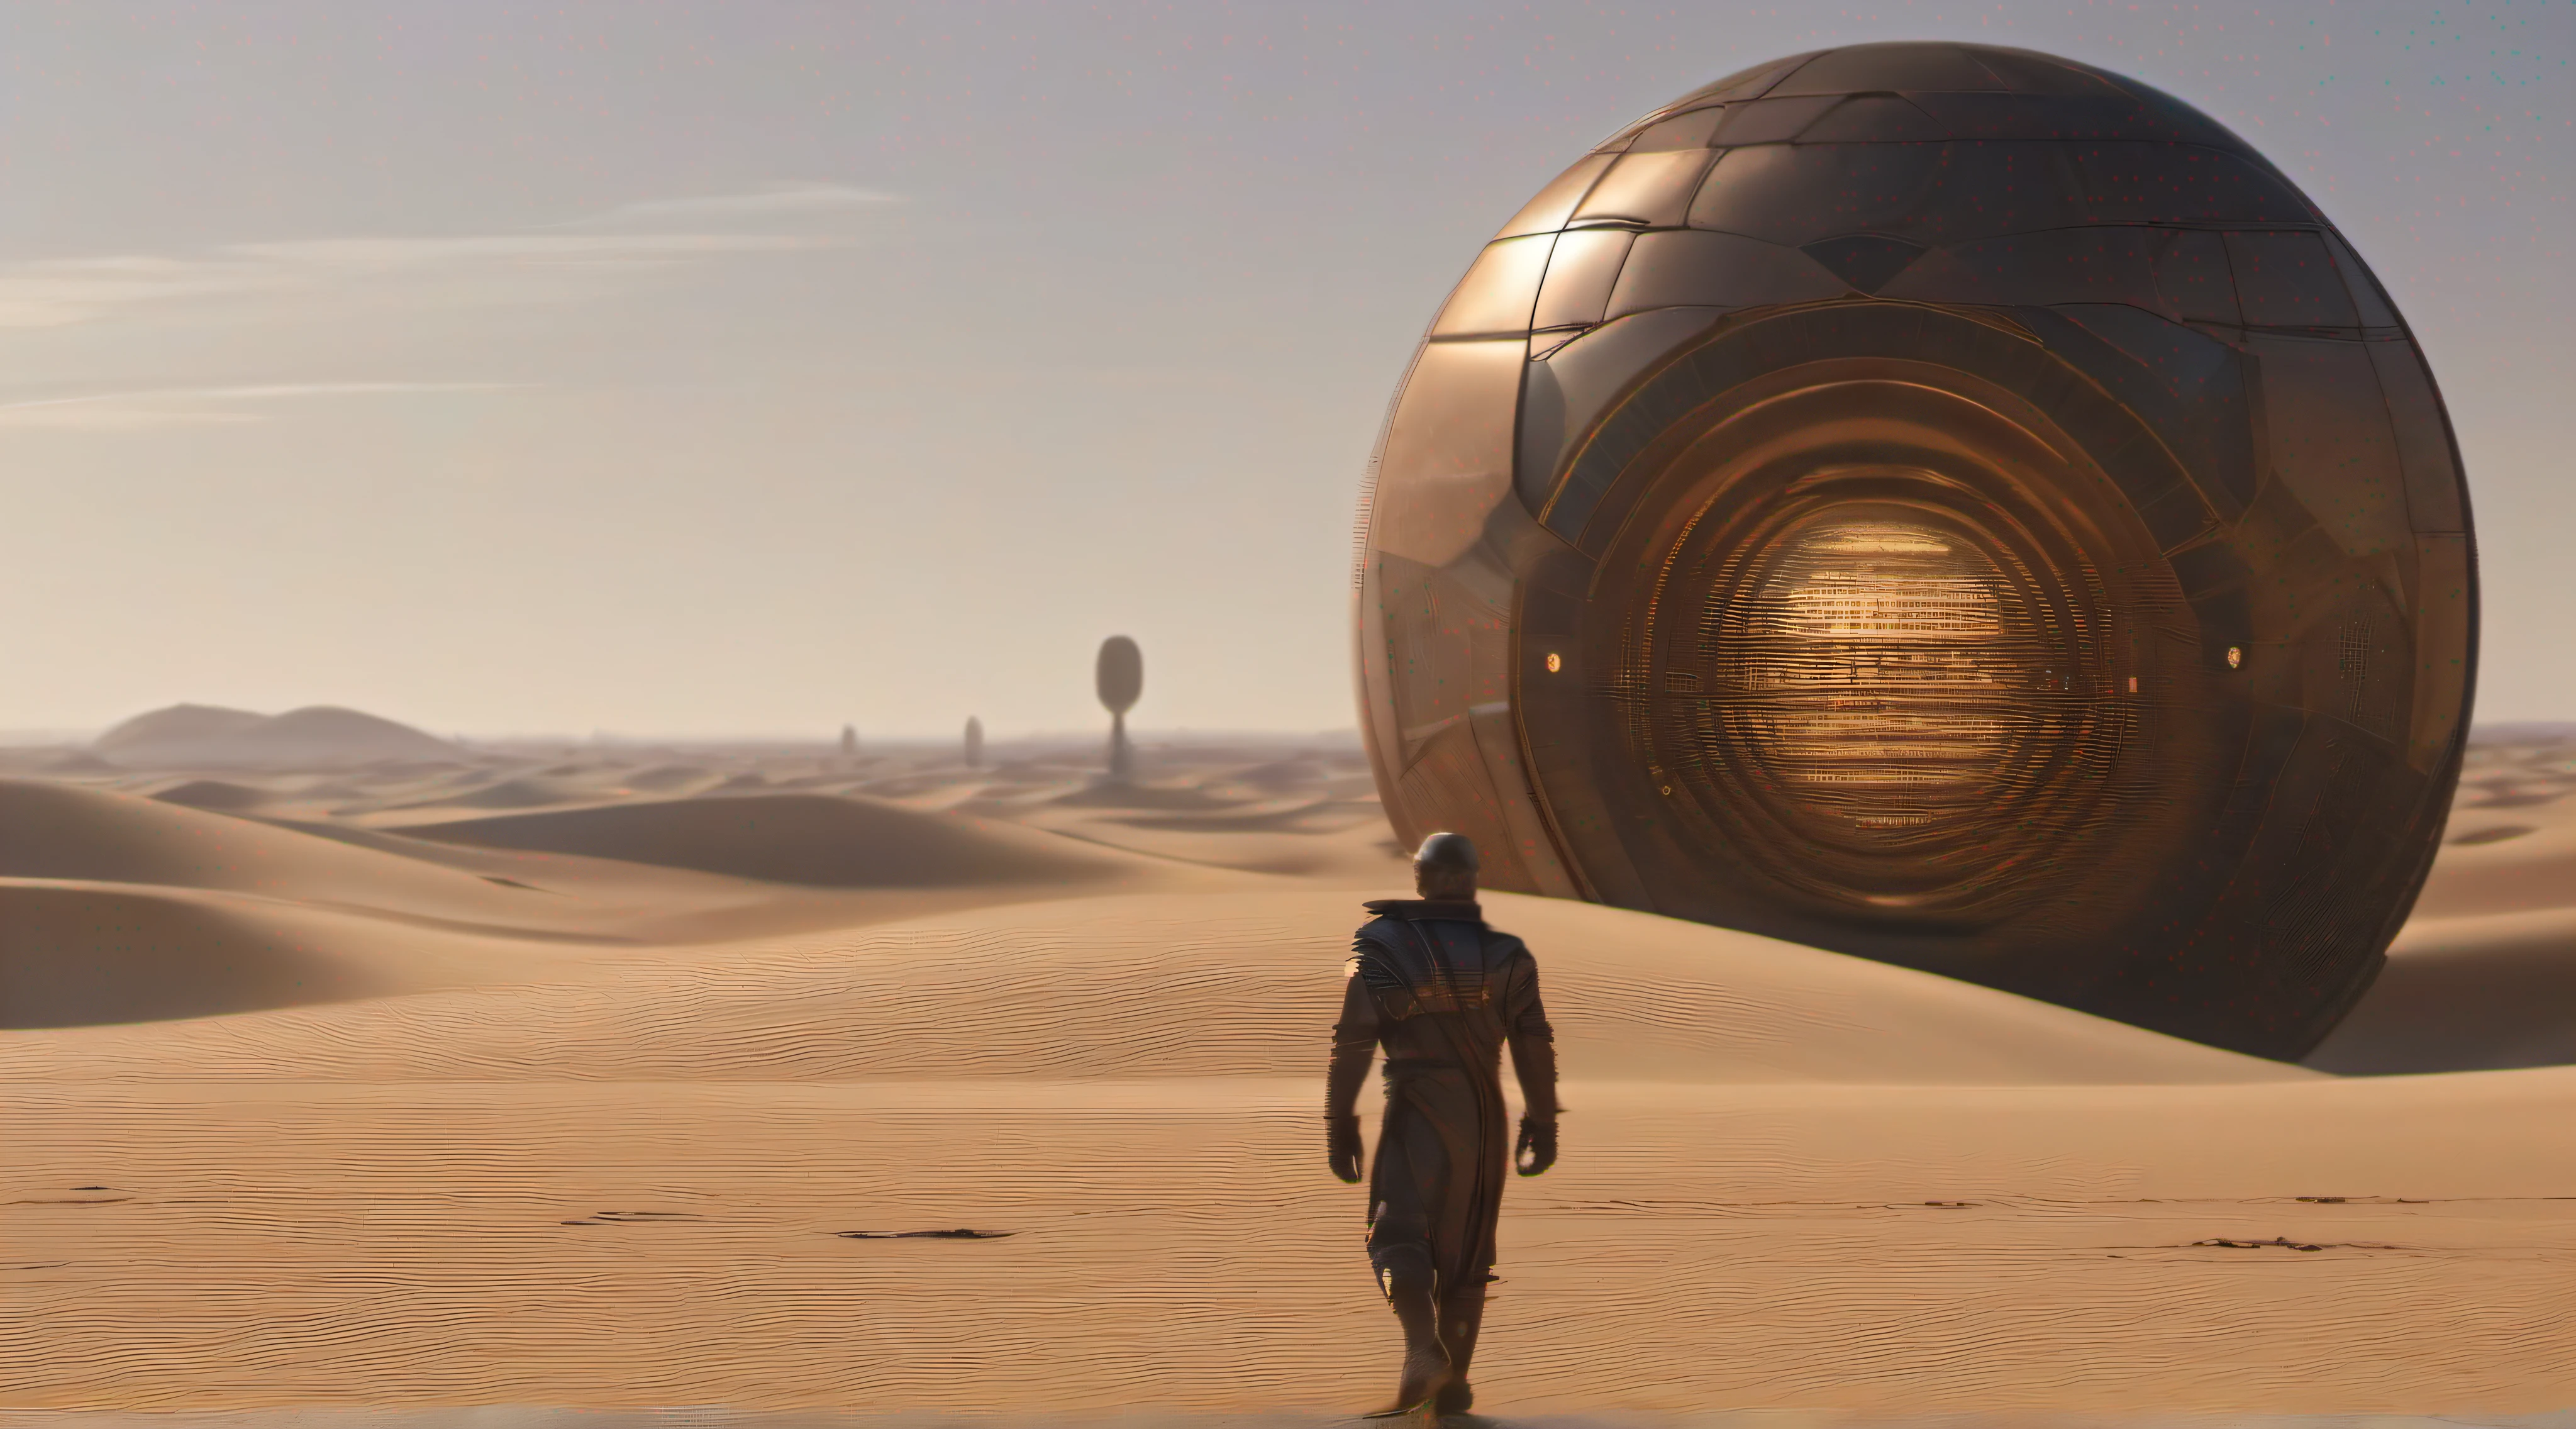 "epic masterpiece scene from the 80s movie 'Dune', fremen walking around symmetrical structures on a desert planet, with a semi-transparent planet in the background sky, in stunning 8k resolution, photorealistic"